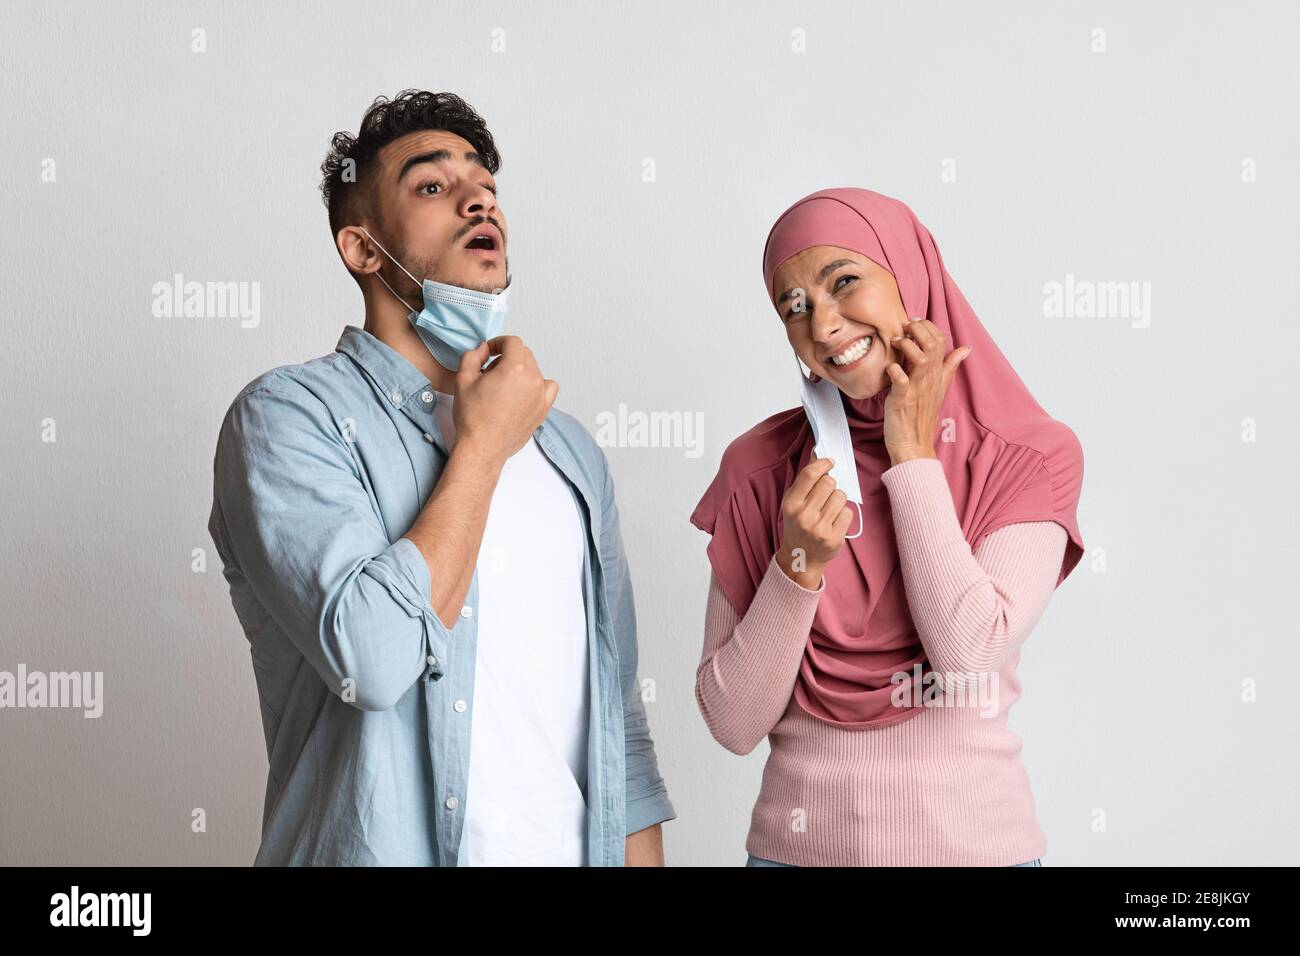 Muslim man and woman feeling discomfort after wearing protective medical face mask Stock Photo